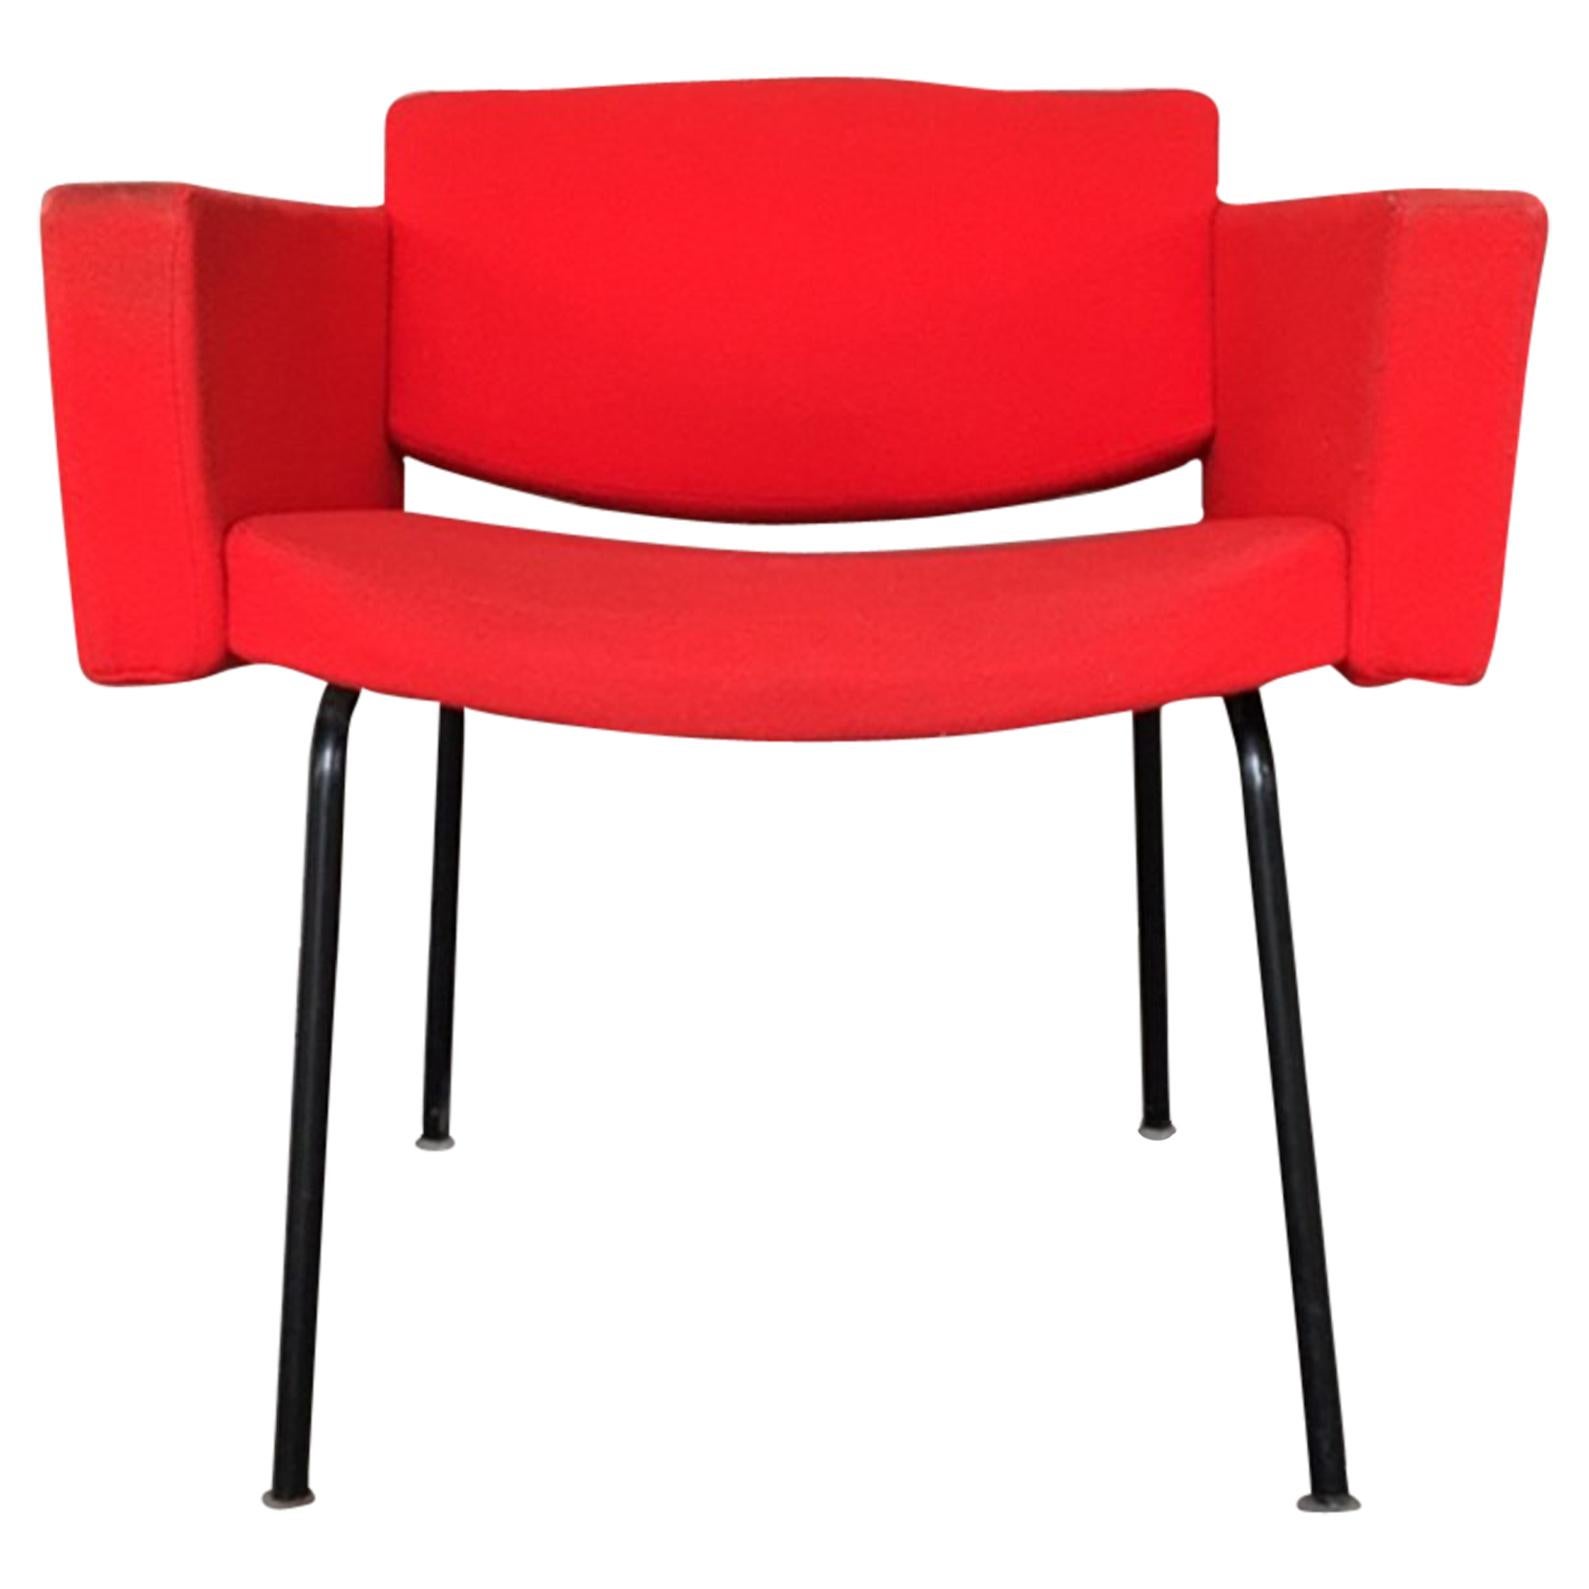 Splendid Red Pierre Guariche Council Armchairs for Meurop, 1960s For Sale